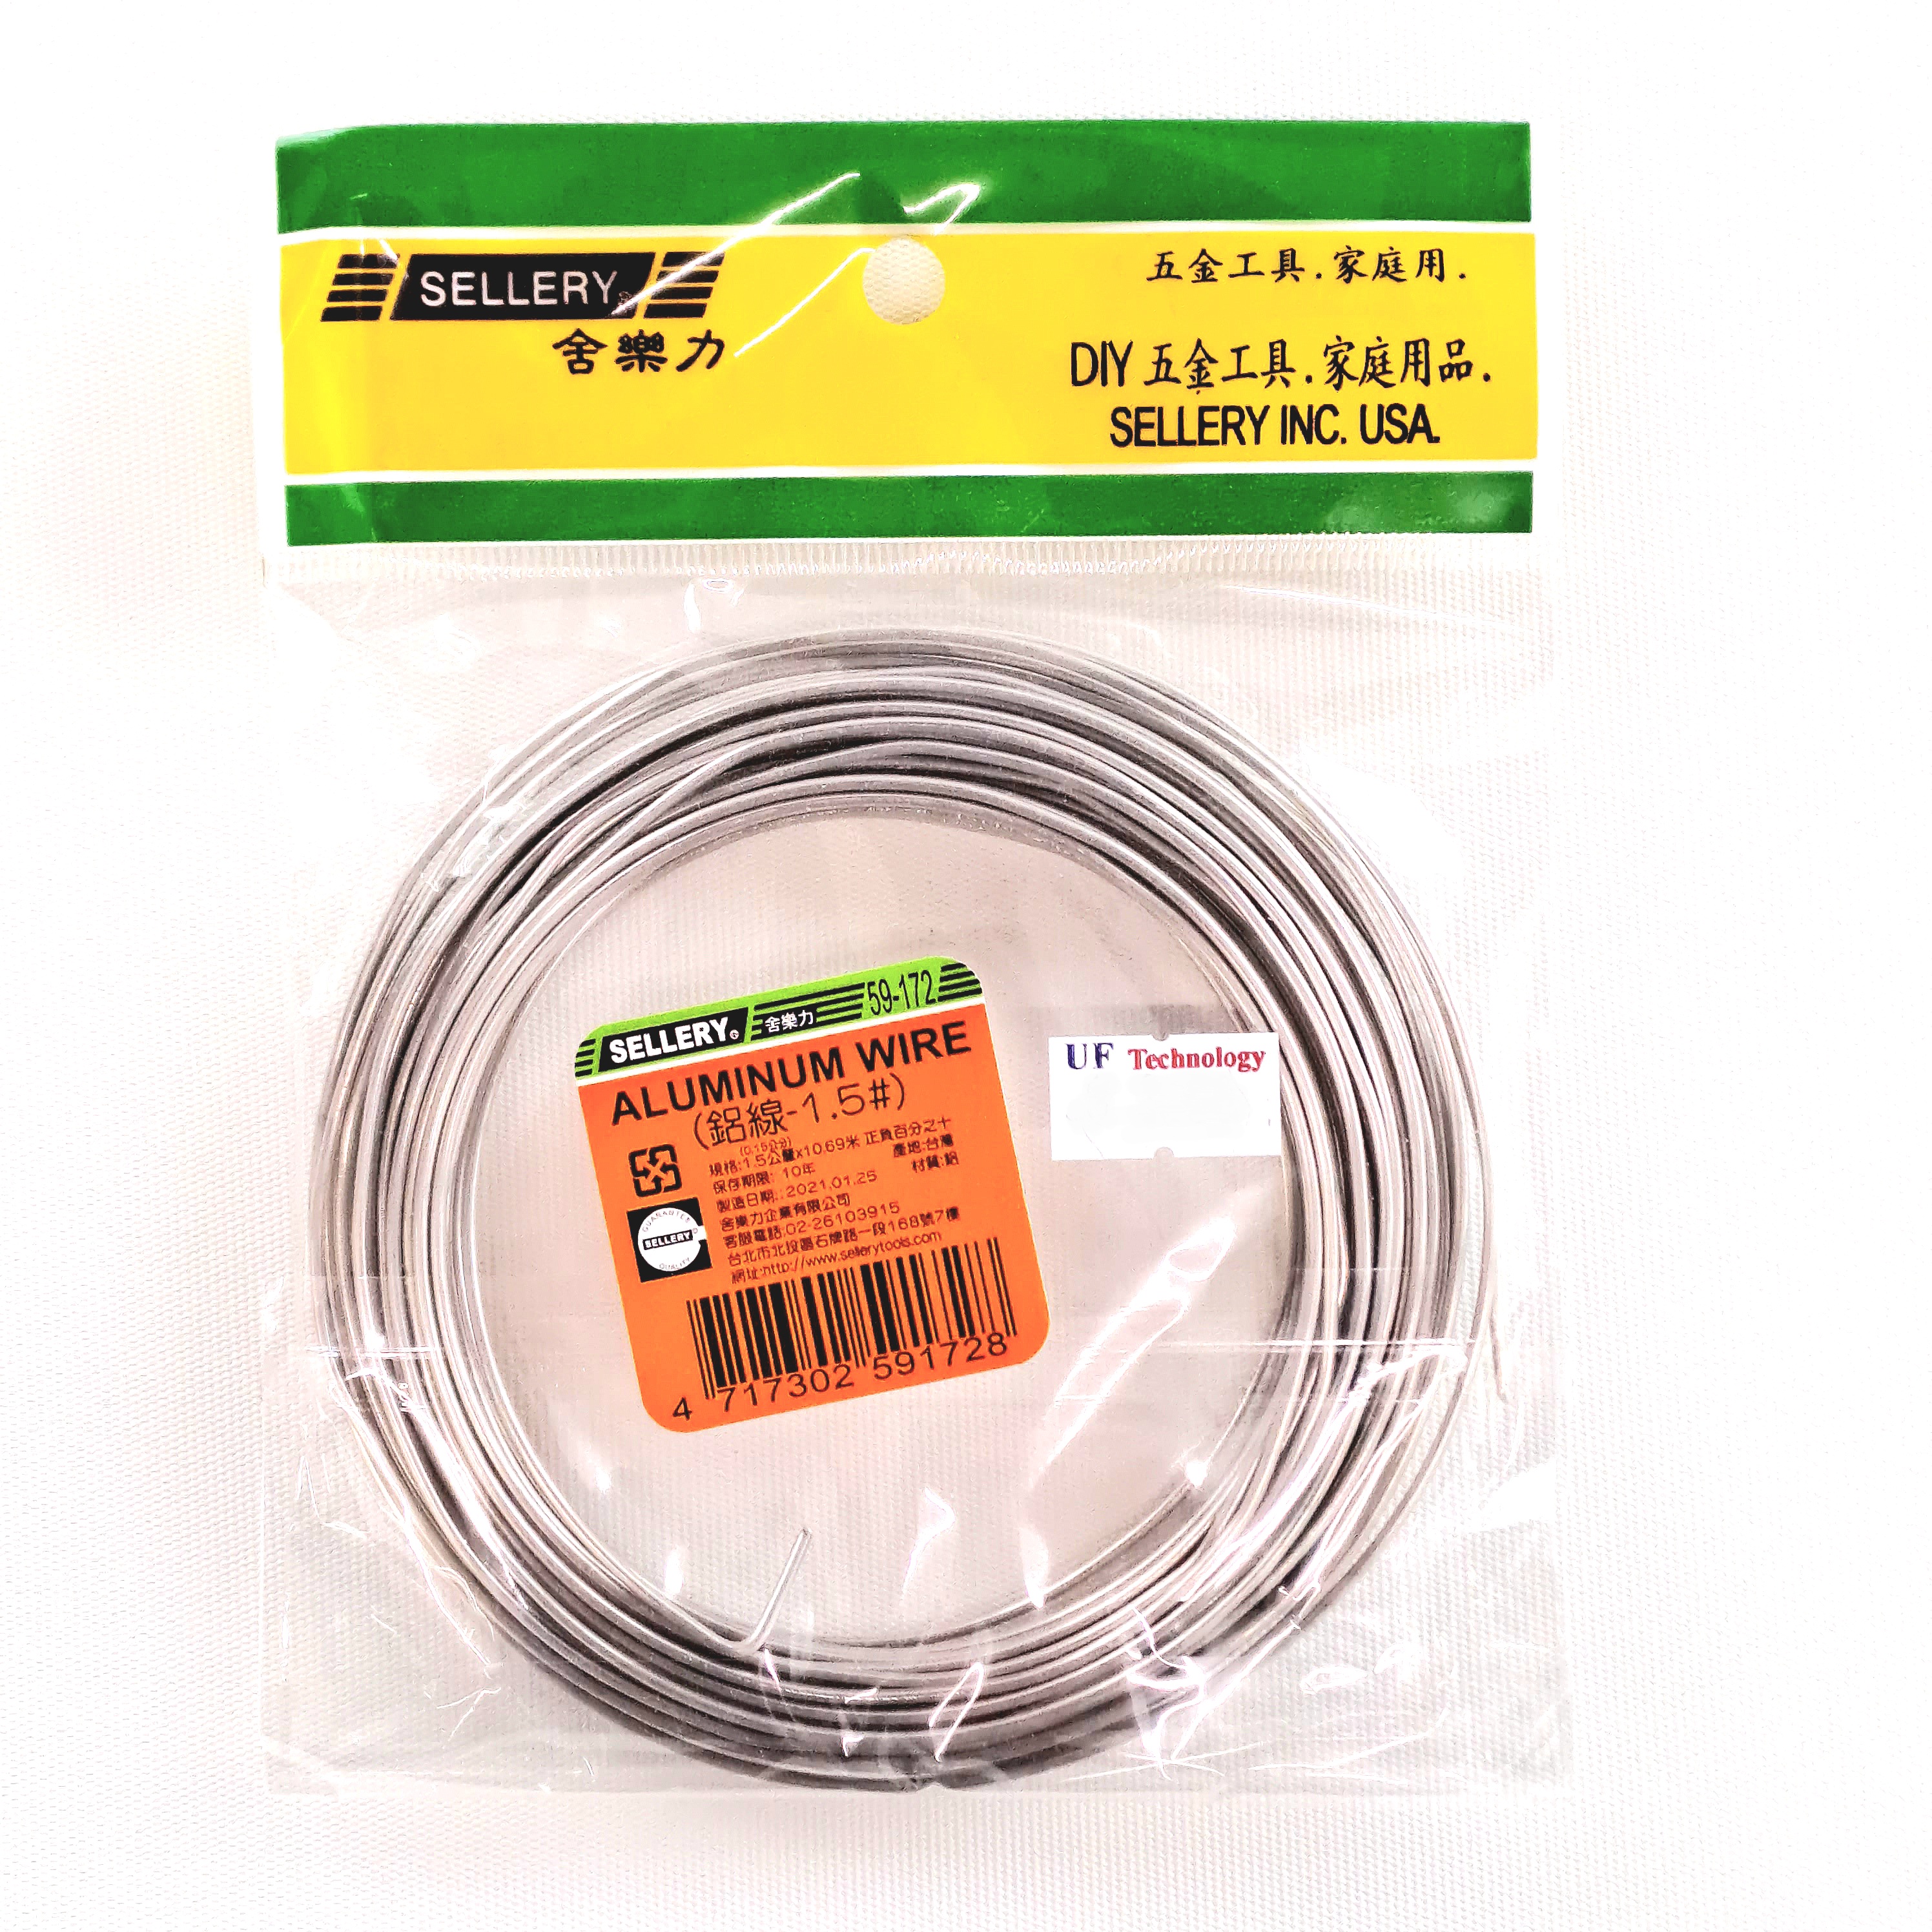 Sellery 59-172 Aluminium Wire, Size: 1.5mm x 35FT